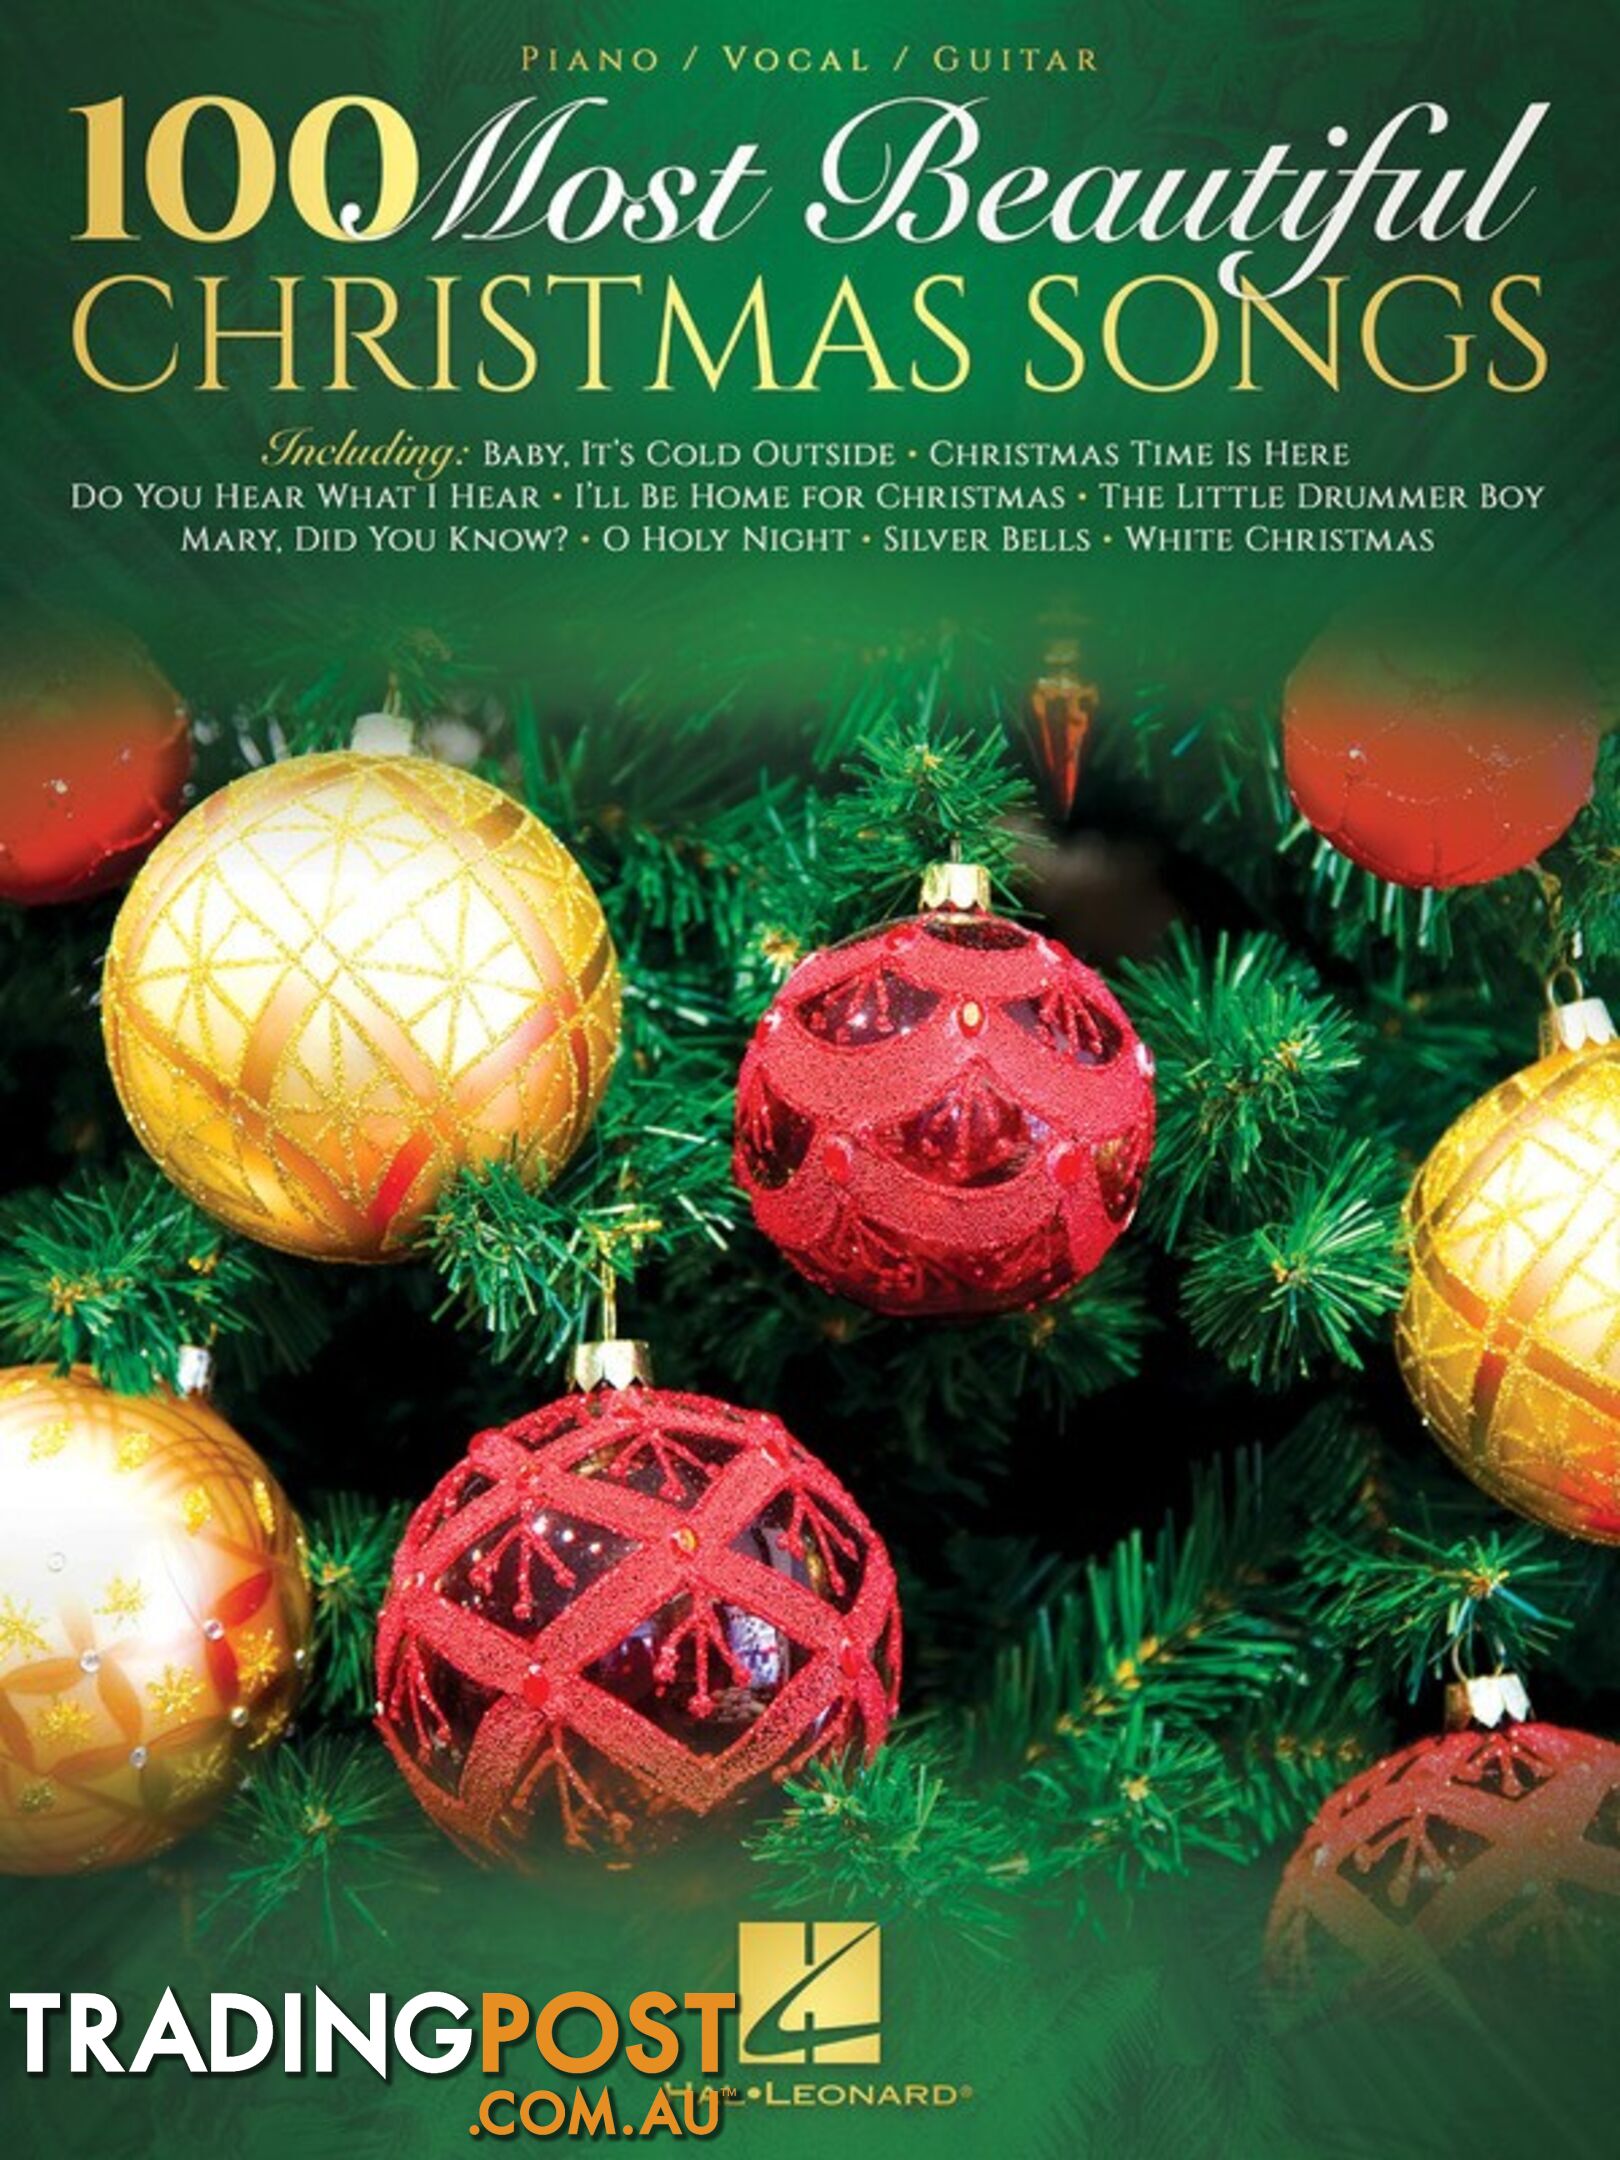 Most Beautiful Christmas Songs 100